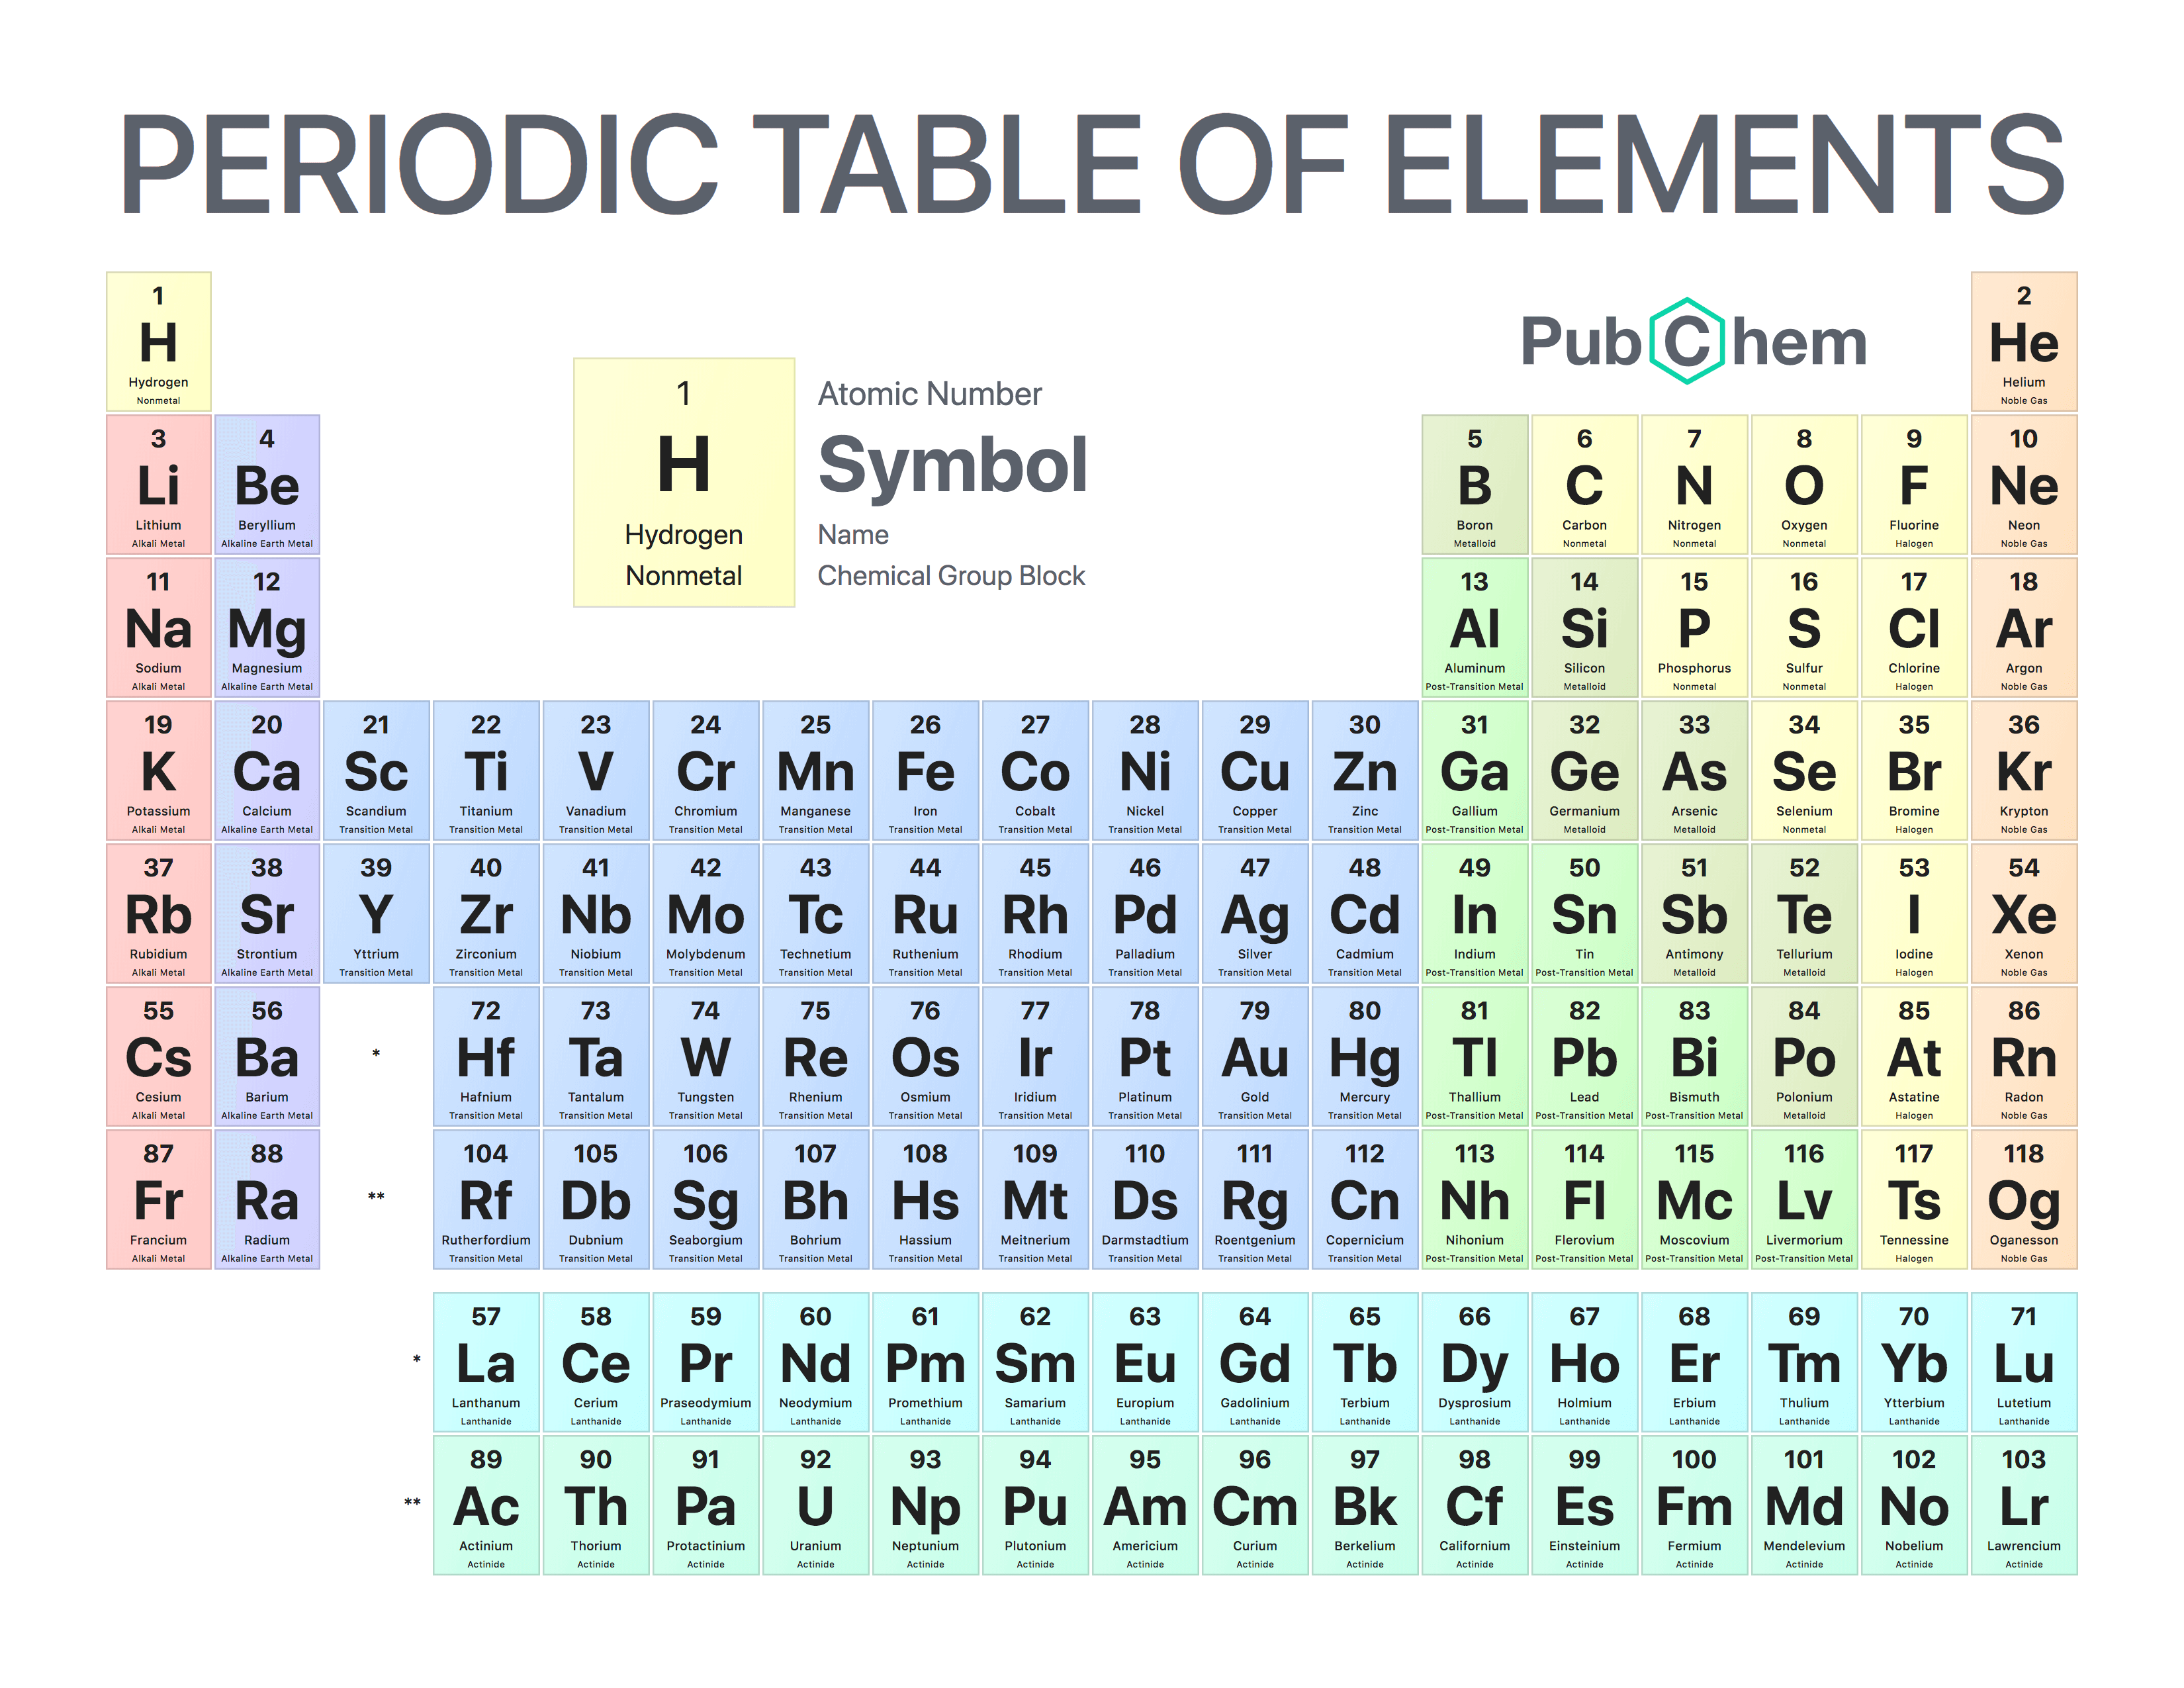 Periodic_Table_of_Elements_w_Chemical_Group_Block_PubChem.png